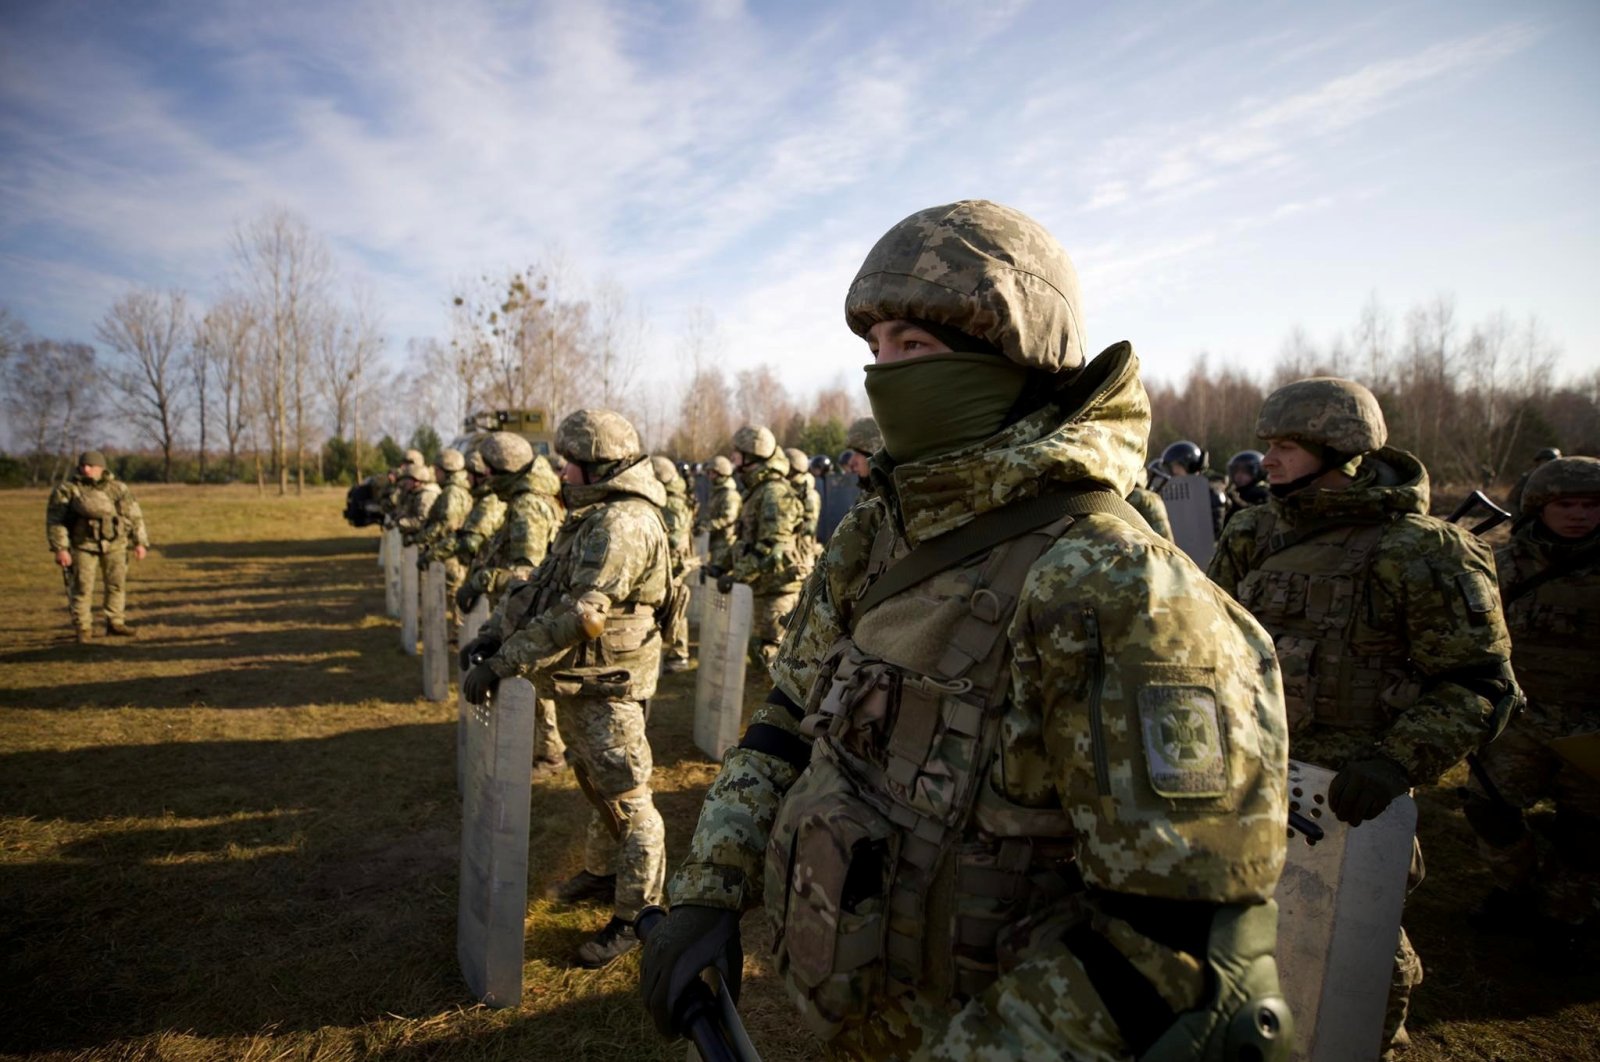 Members of the Ukrainian State Border Guard Service line up at the border with Belarus in Volyn region, Ukraine, Nov. 11, 2021. (Reuters Photo)